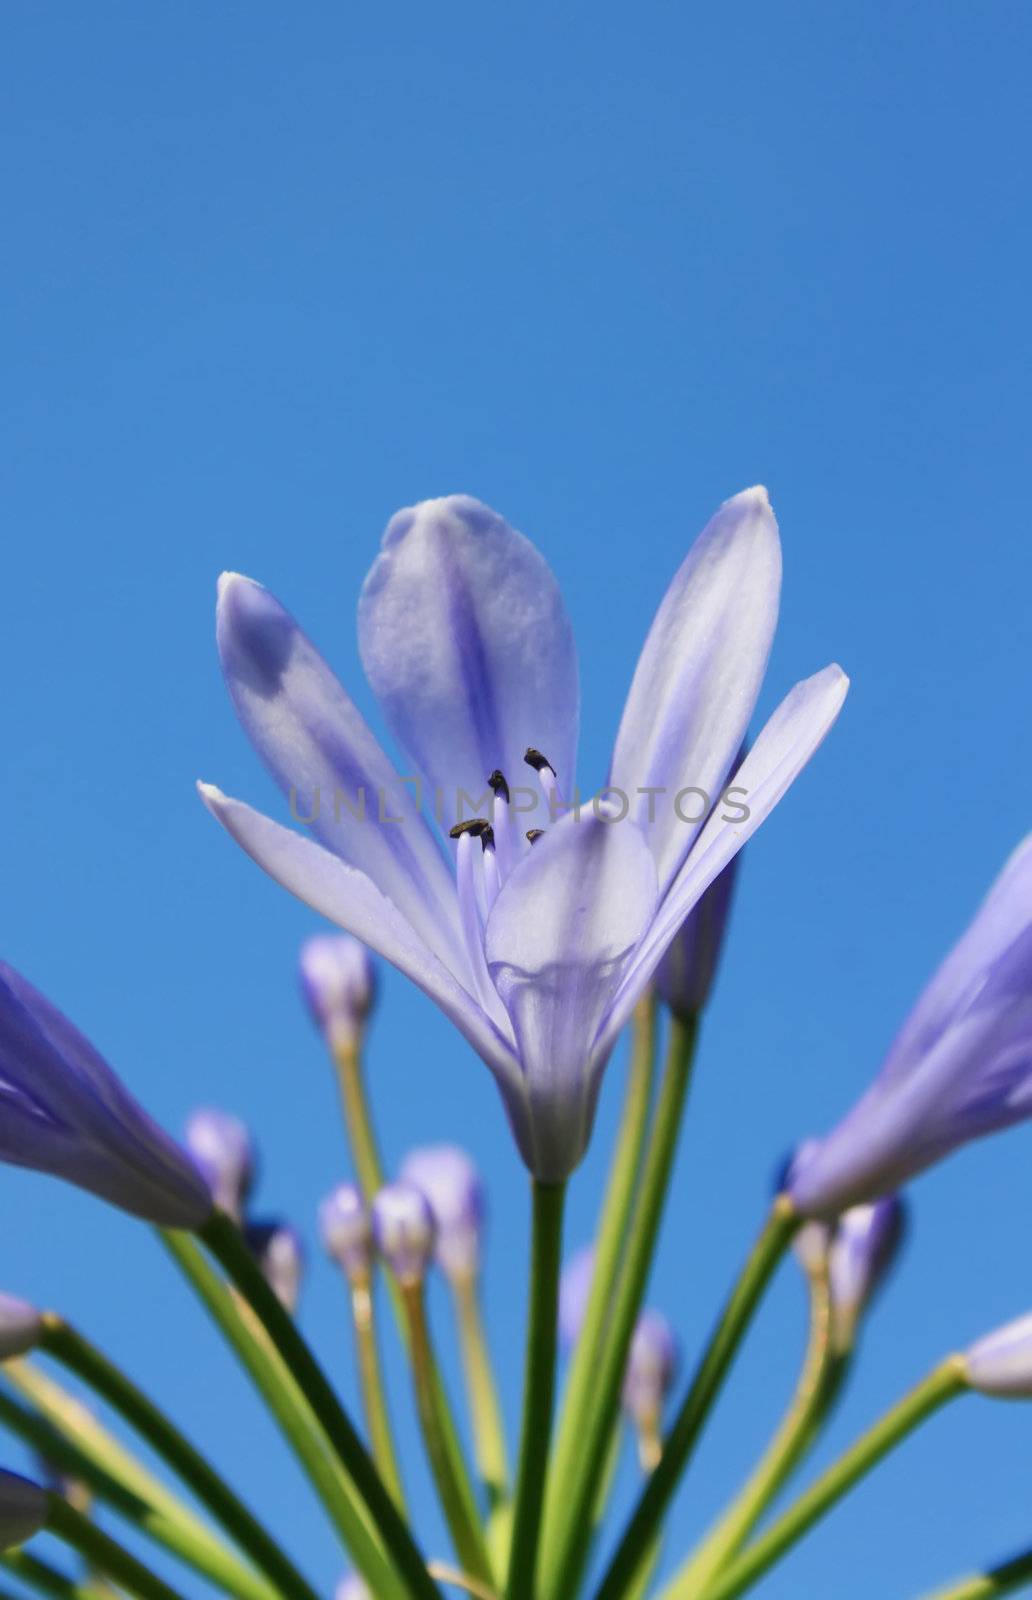 this image shows a purple lily blossom